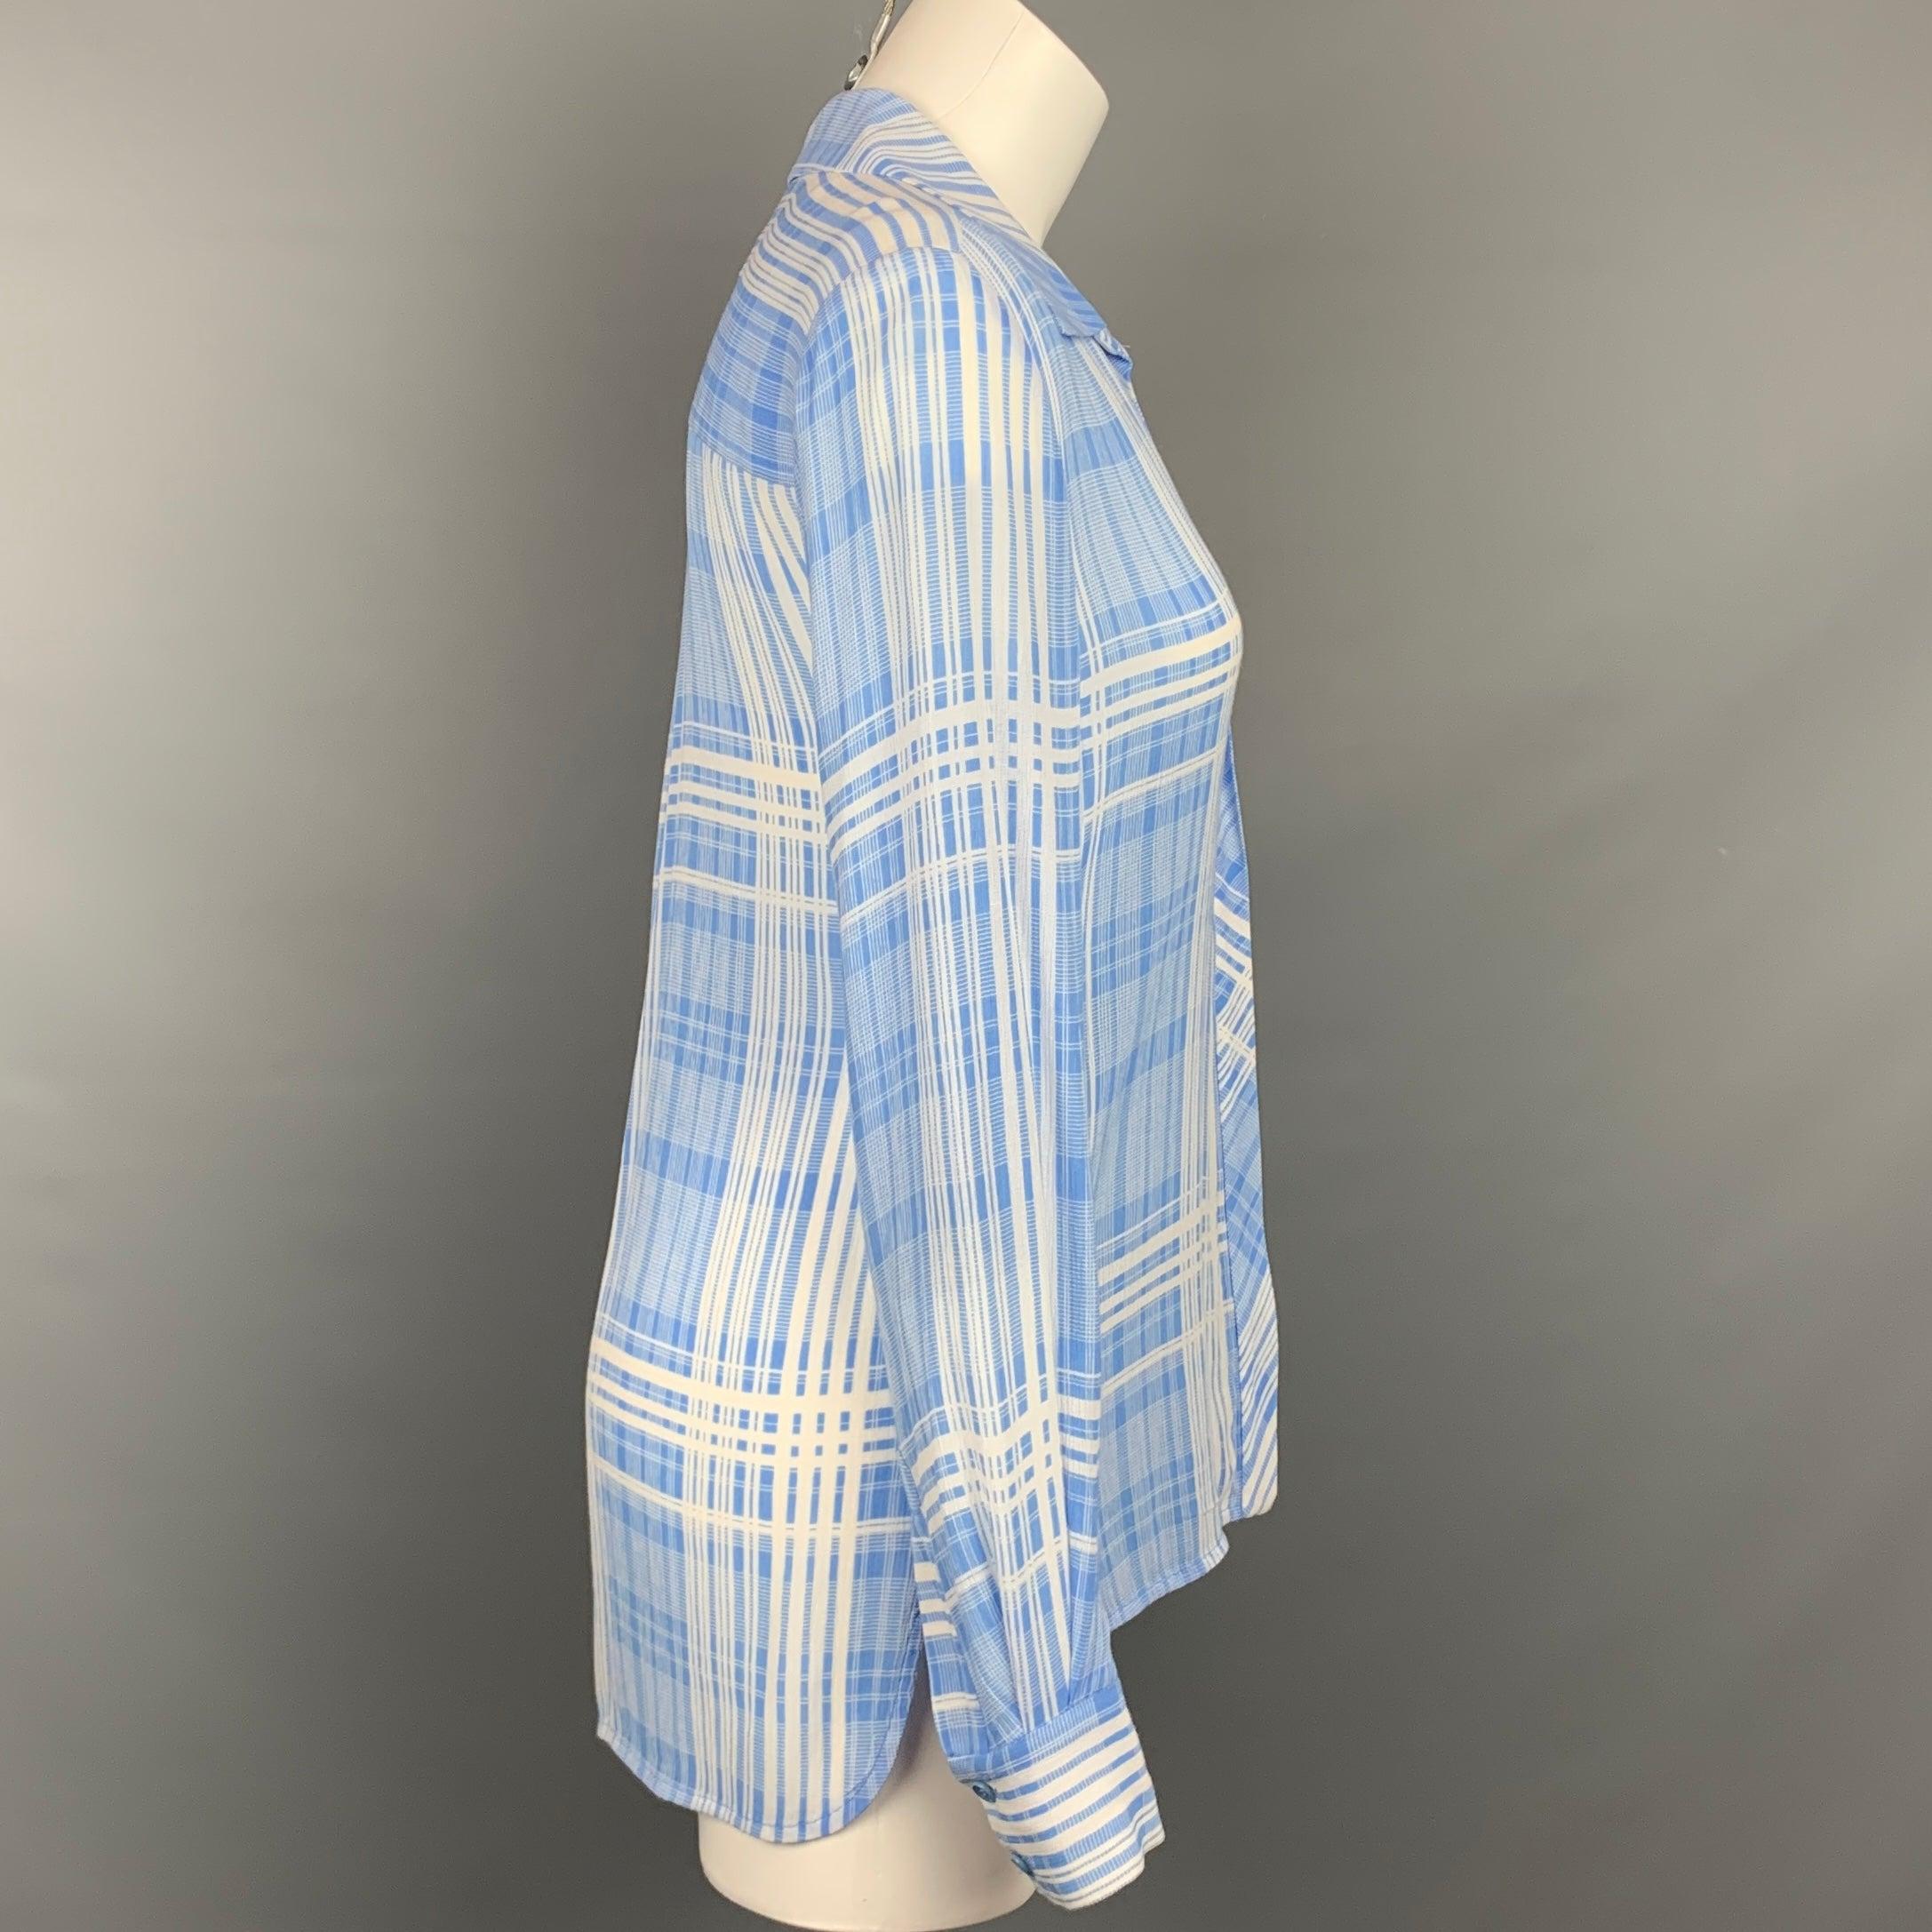 DIANE VON FURSTENBERG blouse comes in a light blue 7 white plaid viscose blend featuring a front pocket, spread collar, loose fit, and a hidden placket closure.
 Very Good
 Pre-Owned Condition. 
 

 Marked:  2 
 

 Measurements: 
  
 Shoulder: 16.5